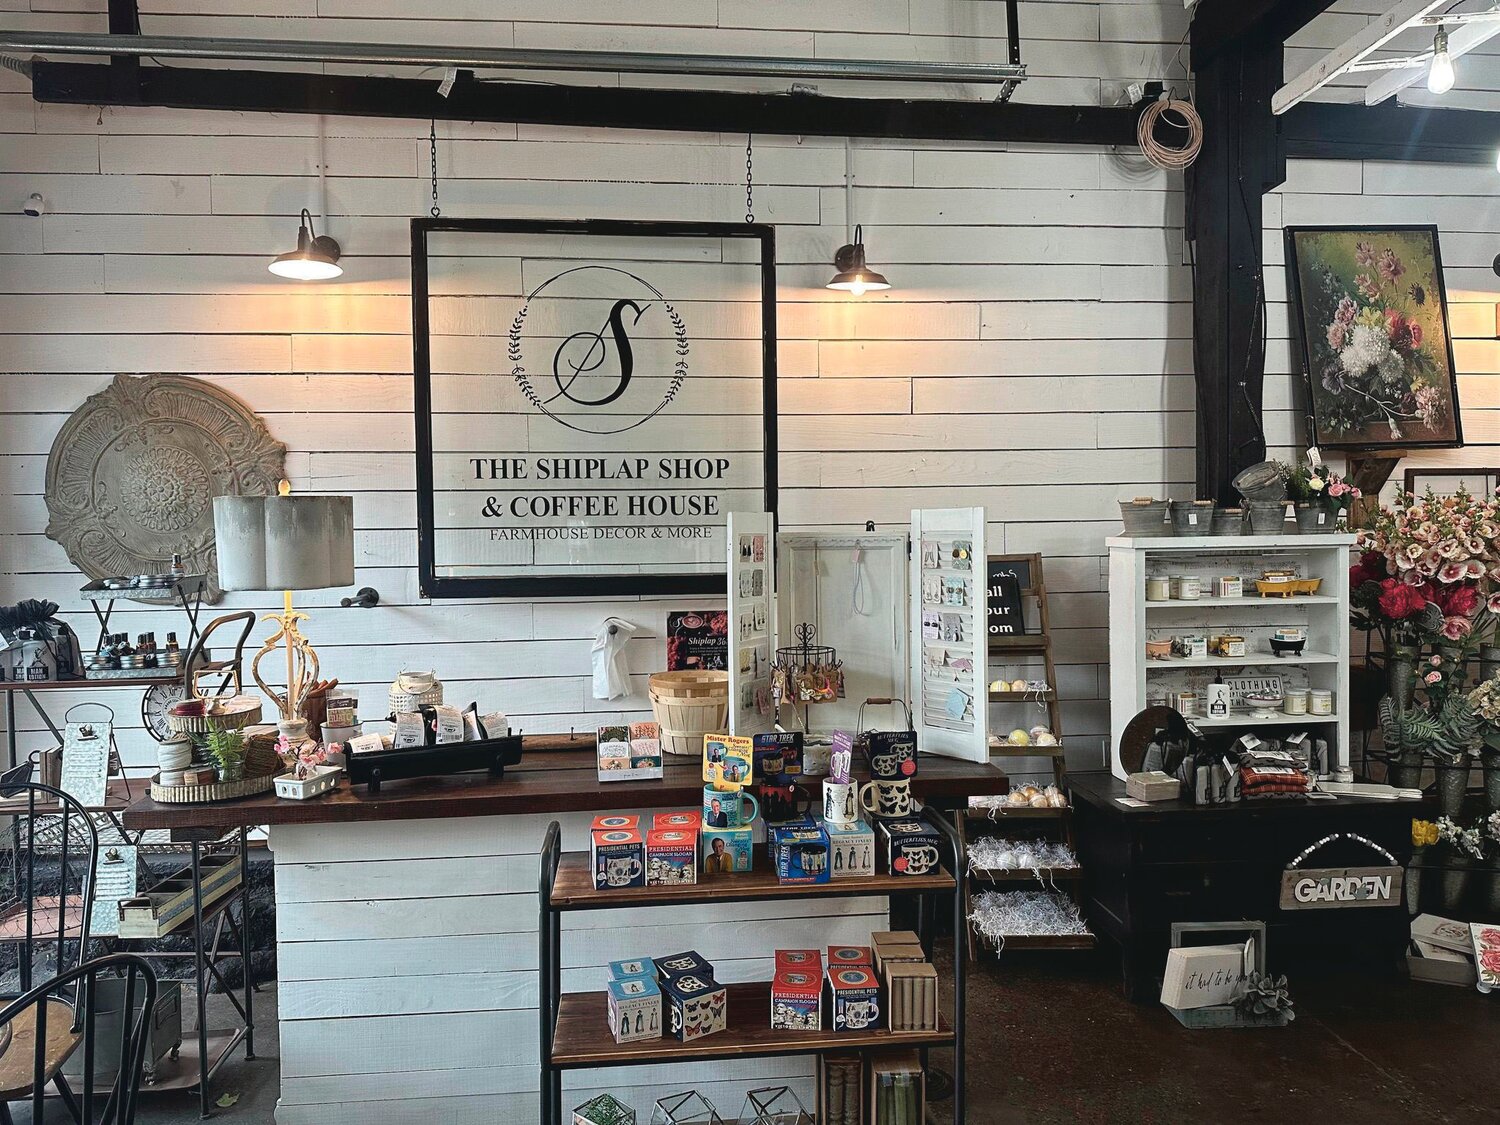 Items like mugs and puzzles are available for purchase at Shiplap Shop and Coffee House in Yelm.